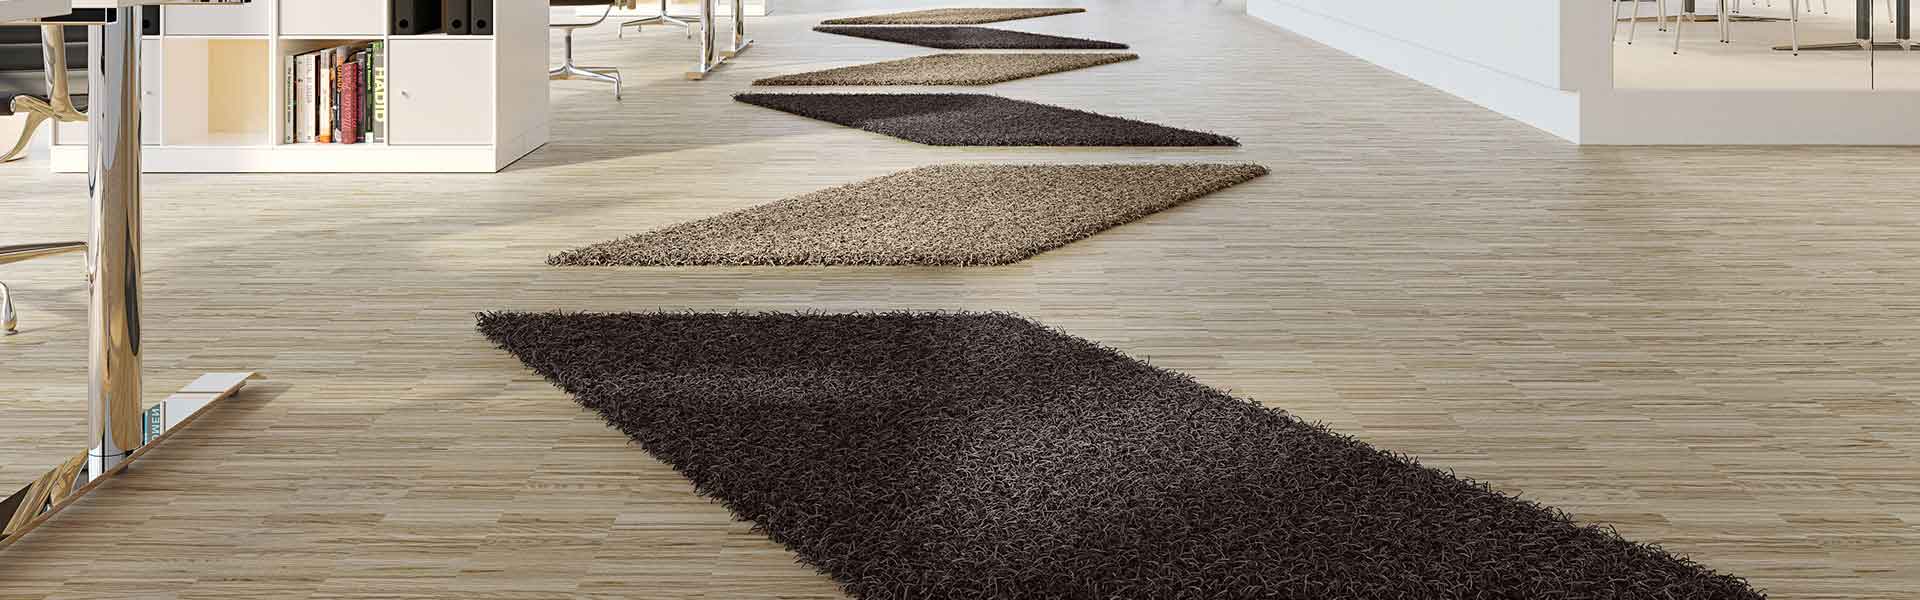 faldt bh sollys Glanzing - rug quality - perfect for all interiors